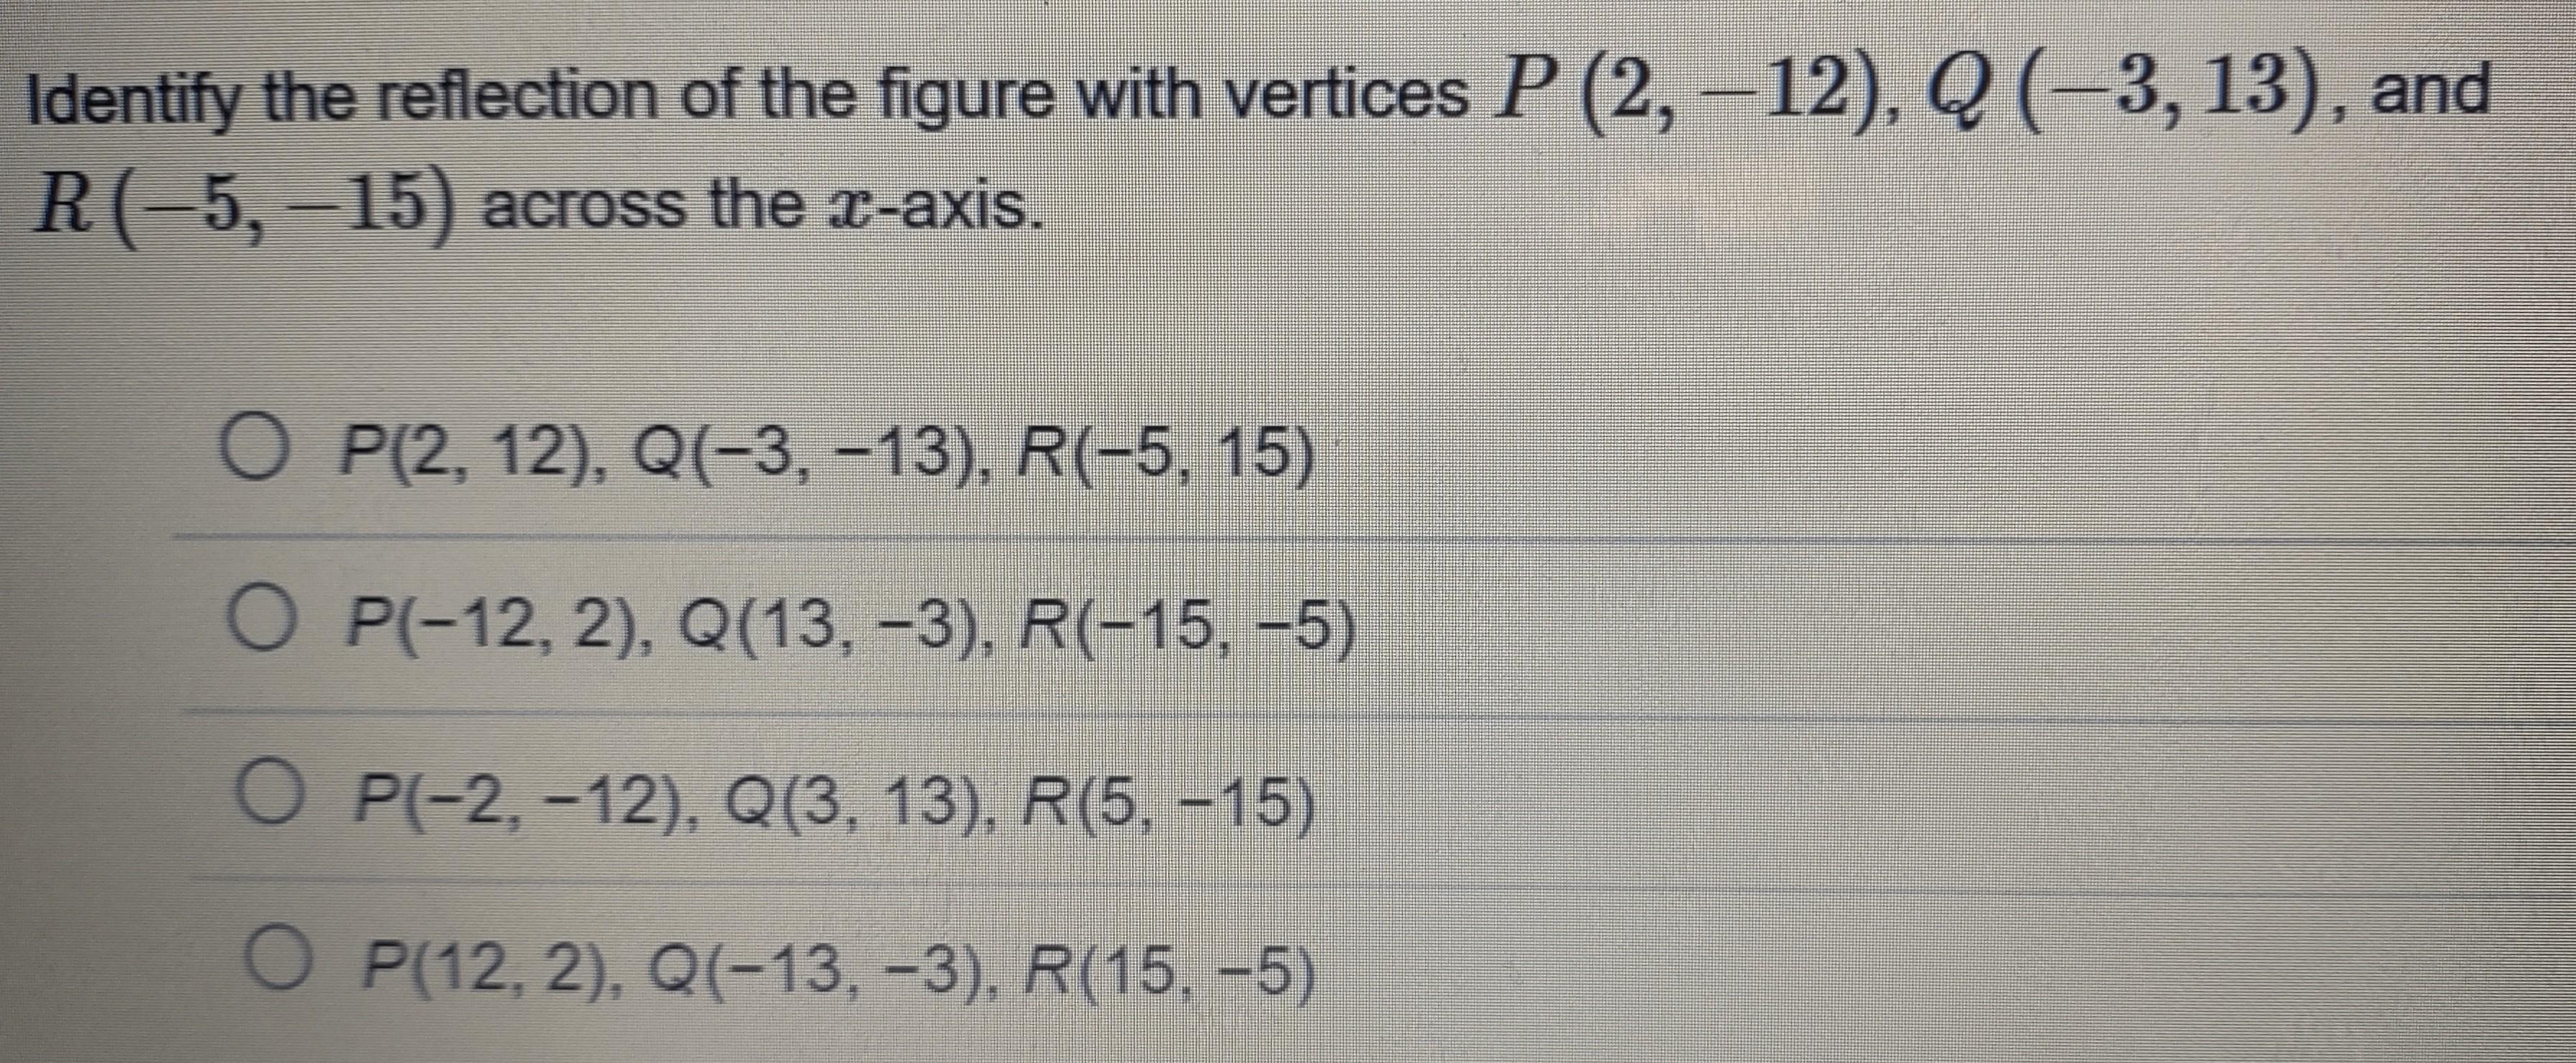 Identify The Reflection Of The Figure With Vertices P (2, -12), Q (-3, 13), And R (-5, - 15) Across The